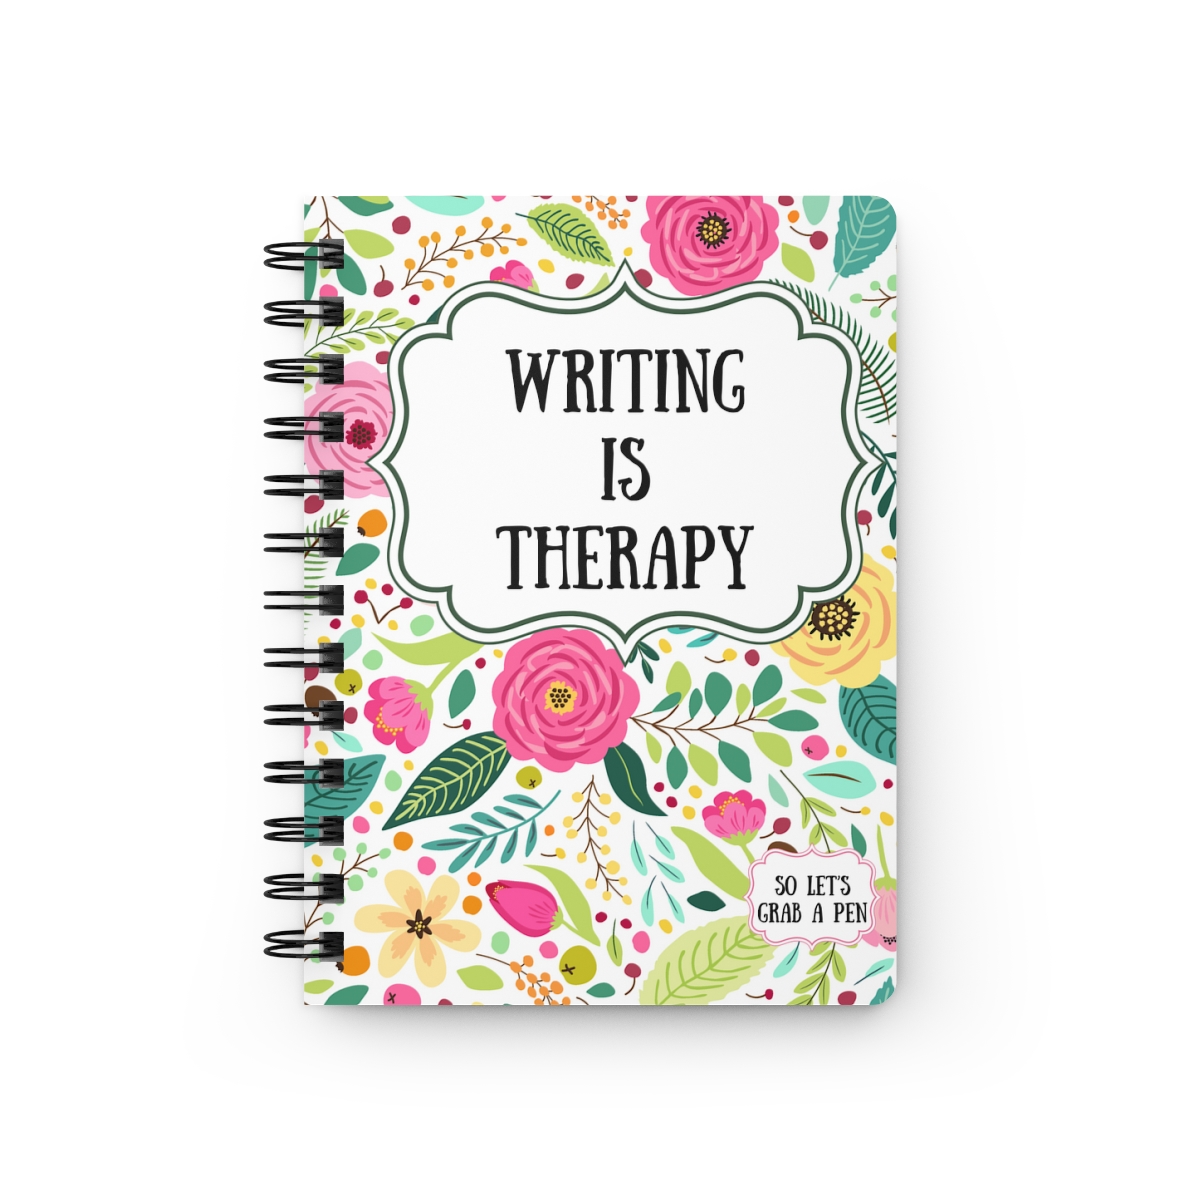 Writing is Therapy, so Let's Grab a Pen! product thumbnail image